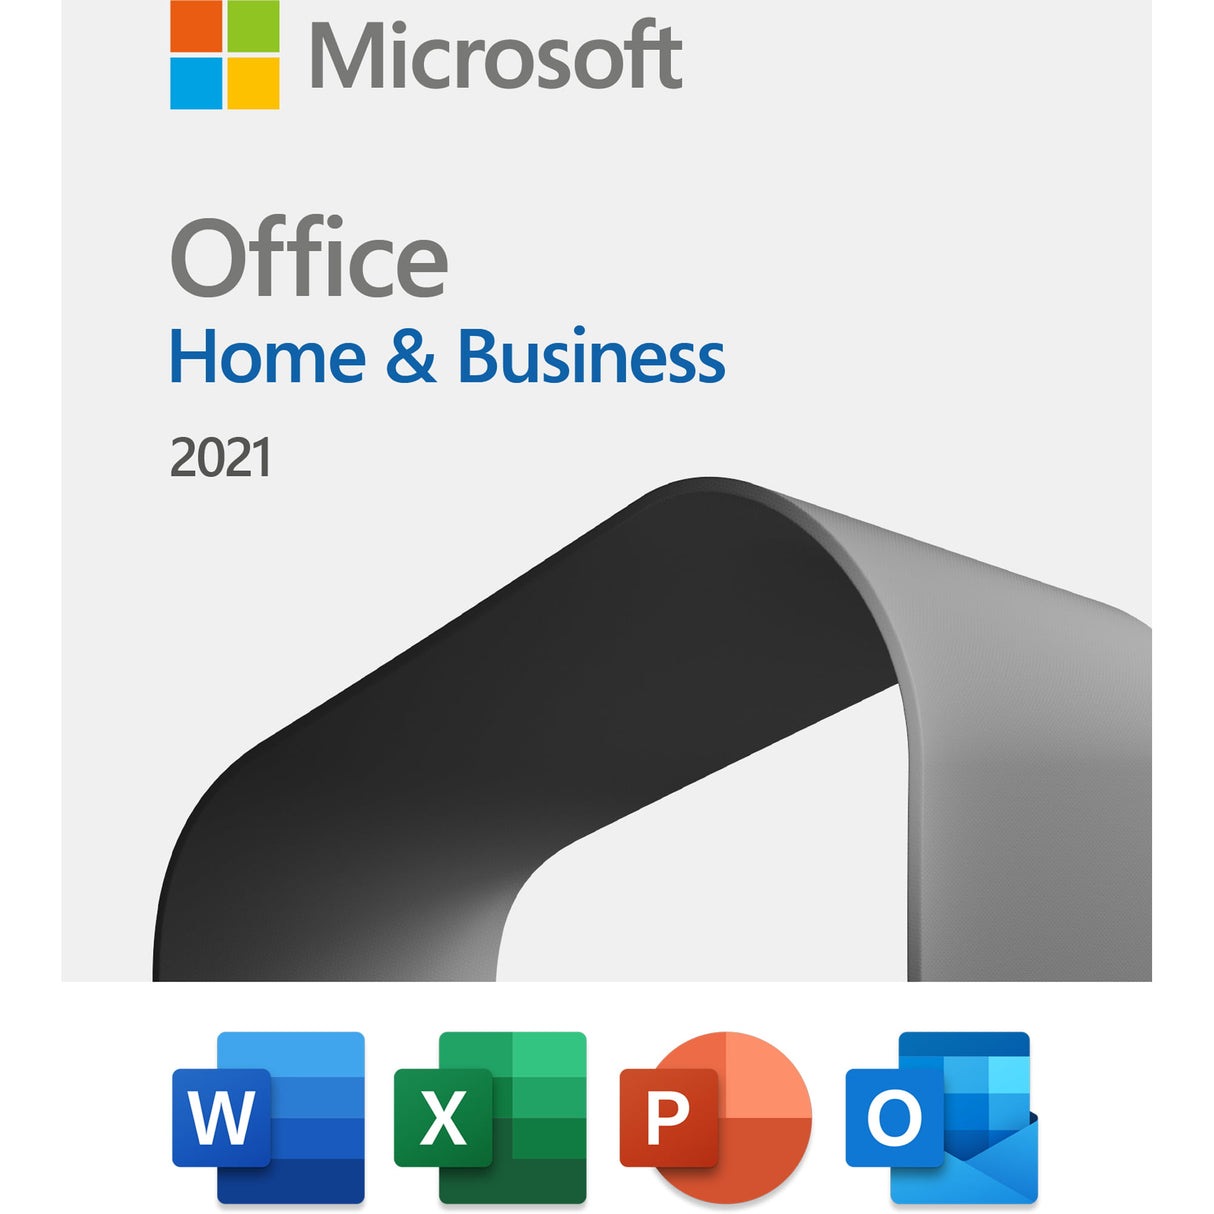 Microsoft Office Home & Business 2021 One-time purchase for 1 PC or Mac Download